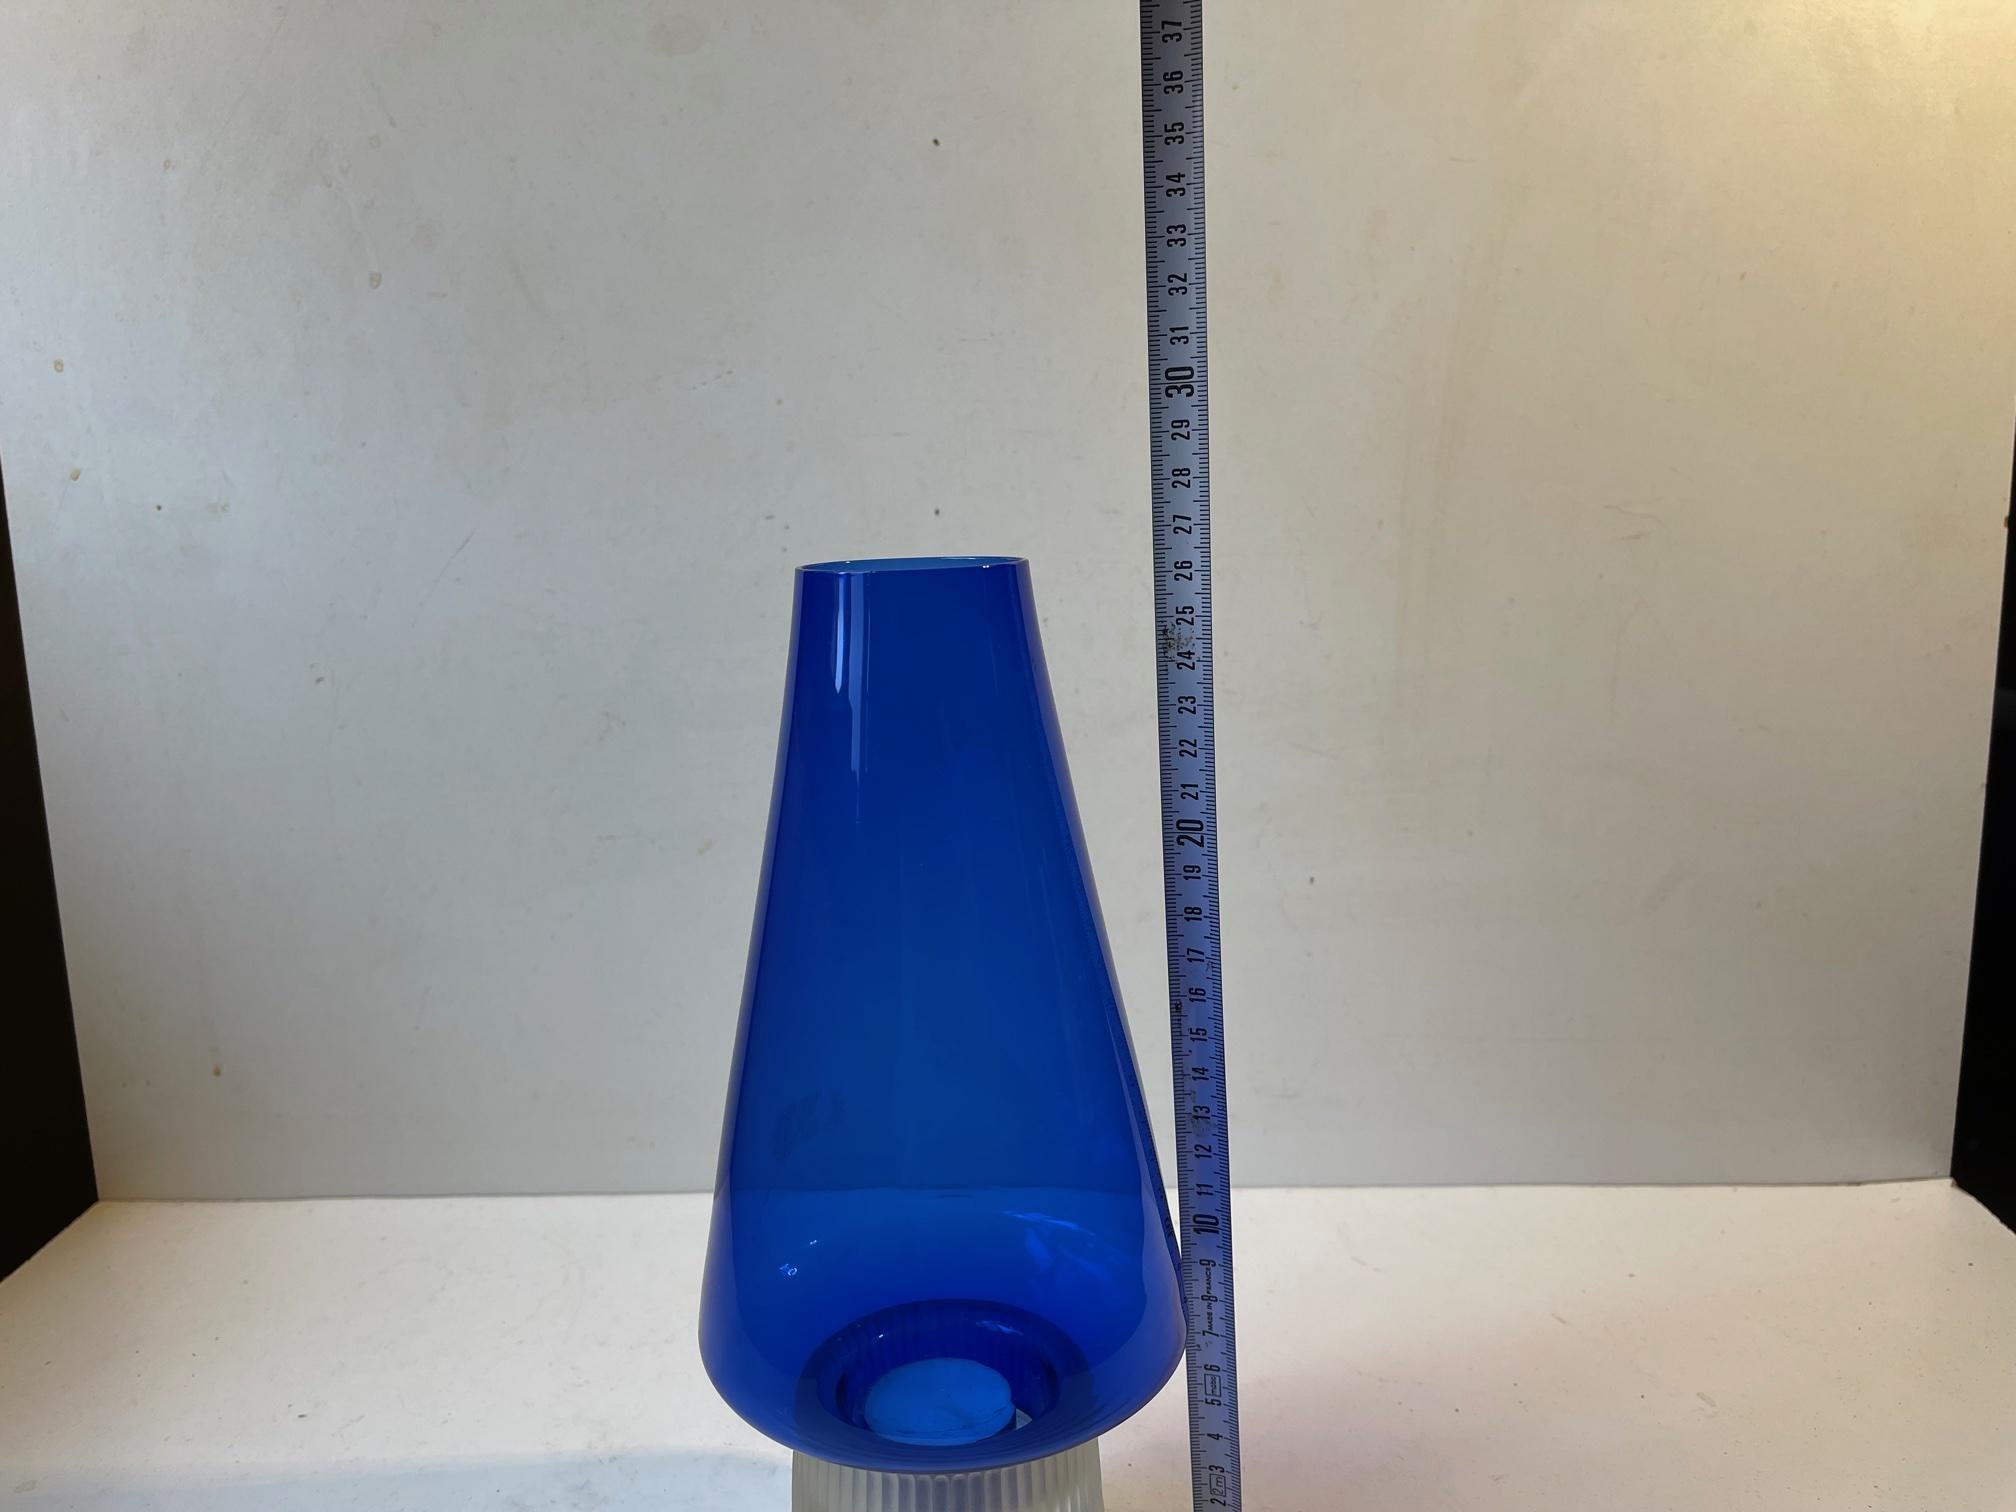 Per Lütken 'Hygge' Candle Lamp in Blue Glass, Holmegaard 1970s In Good Condition For Sale In Esbjerg, DK